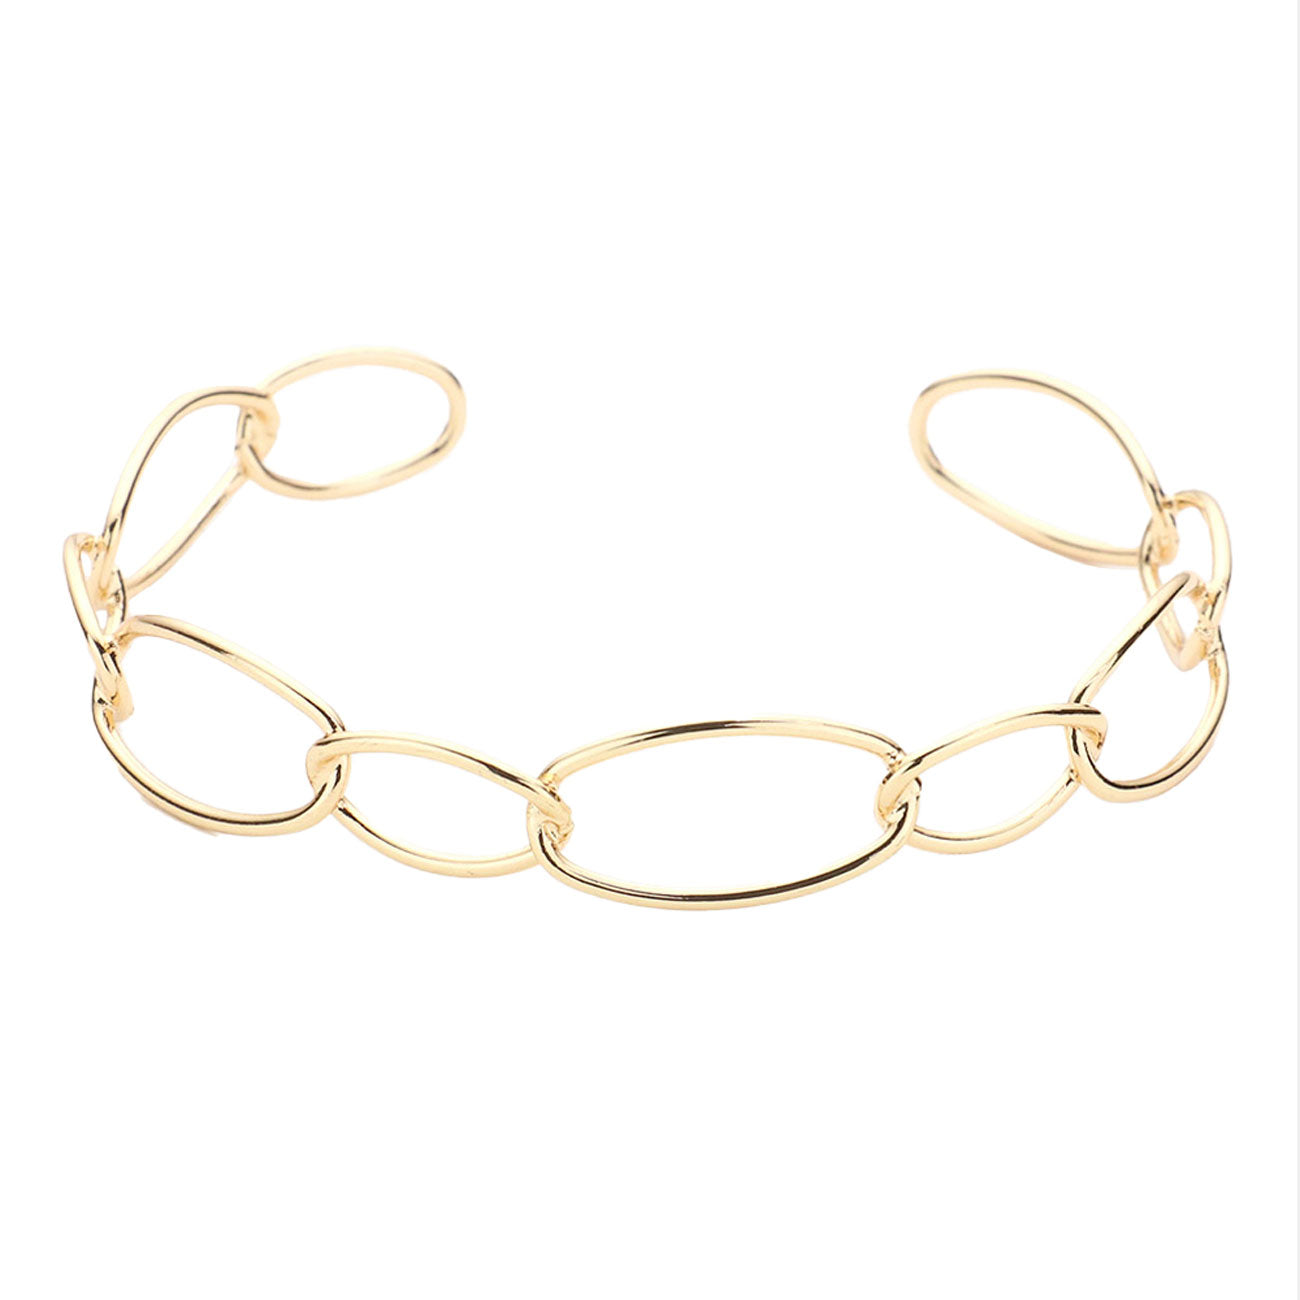 Gold Brass Metal Open Oval Link Cuff Bracelet, is beautiful addition to enlightening your beauty to a greater extent and make you feel absolutely special. It adds a pop of pretty color to enrich your attire. Coordinate with any outfit for a any occasion to make you absolutely fabulous and stand out from the crowd. Wear this awesome cuff bracelet at weddings, wedding showers, receptions, anniversaries, etc.